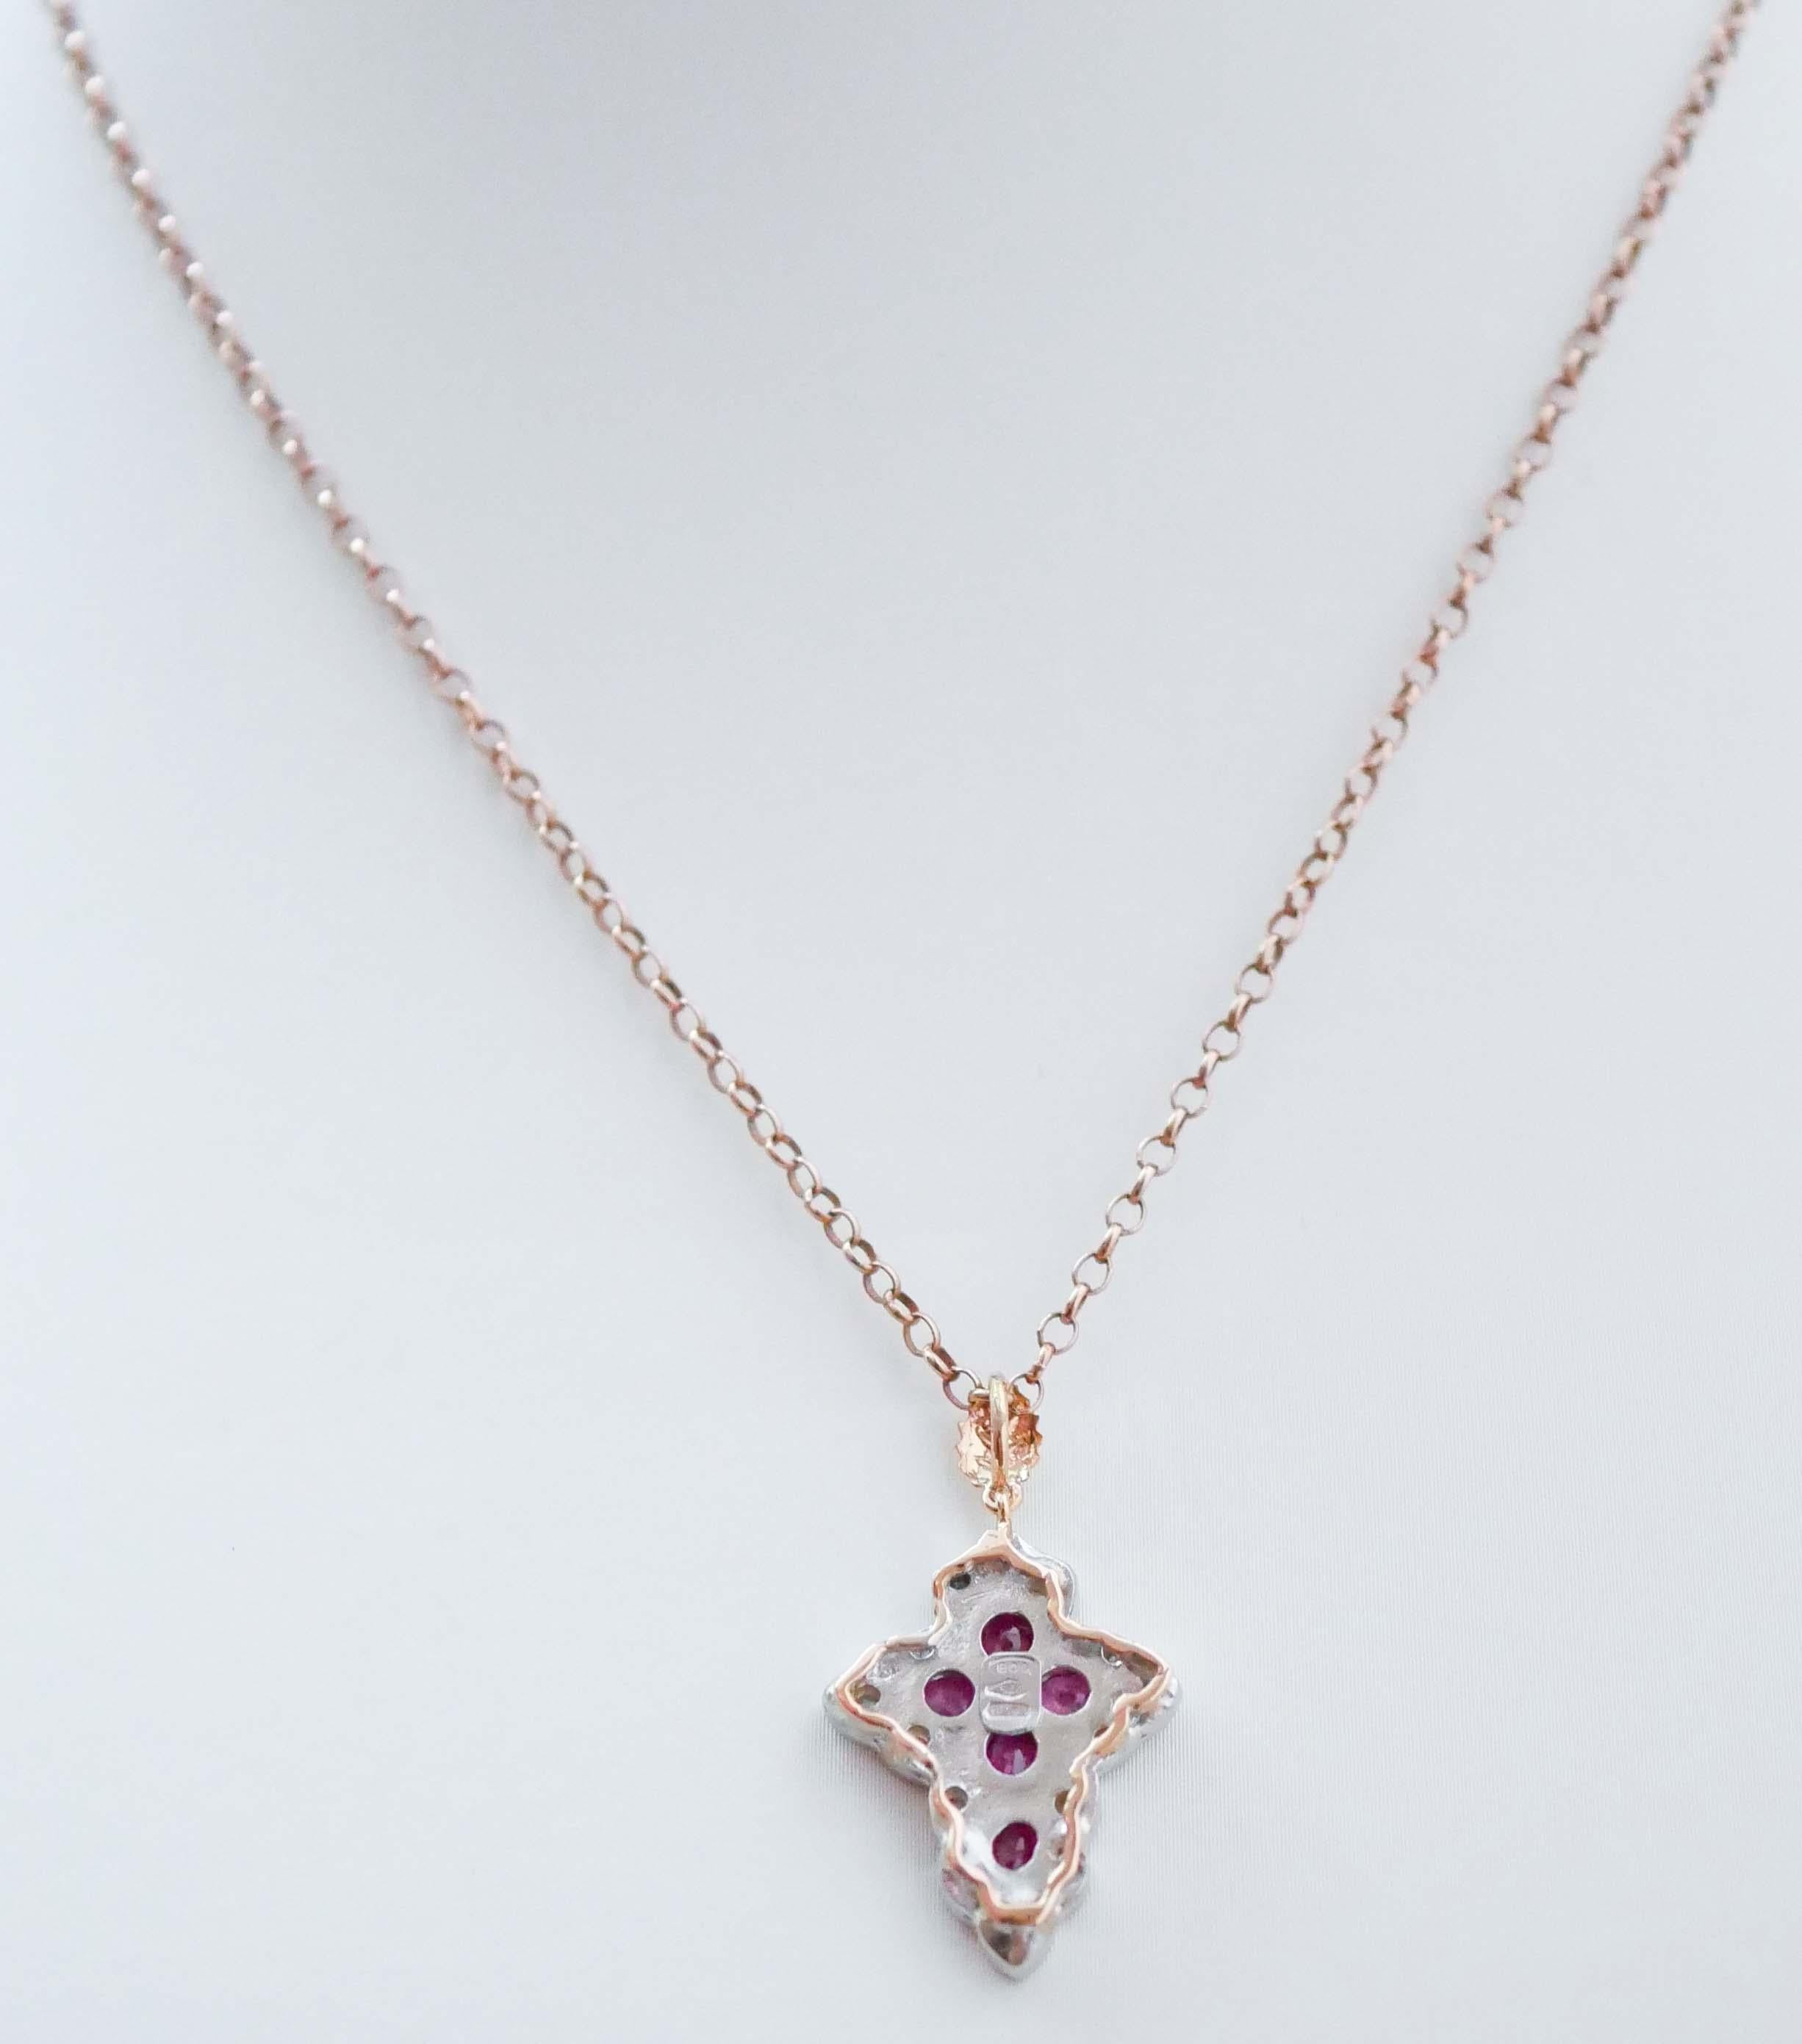 Mixed Cut Rubies, Diamonds, Rose Gold and Silver Cross Pendant. For Sale